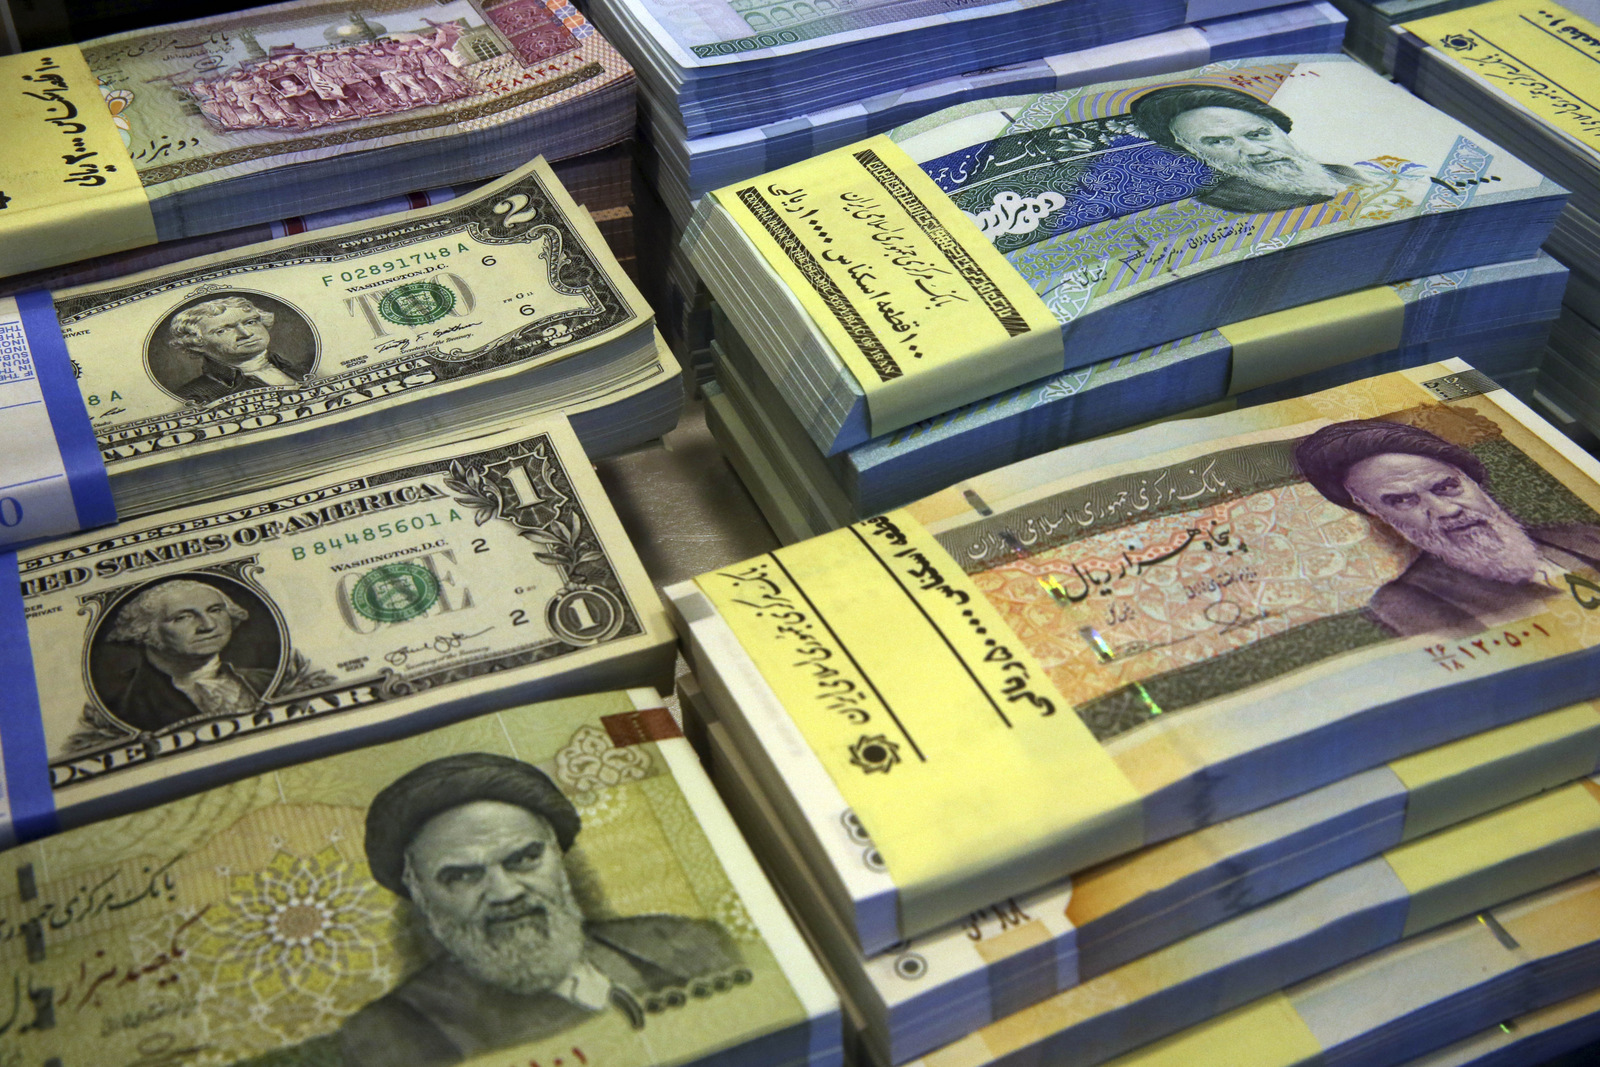  Iranian and U.S. banknotes are on display at a currency exchange shop in downtown Tehran, Iran. (AP/Vahid Salemi)